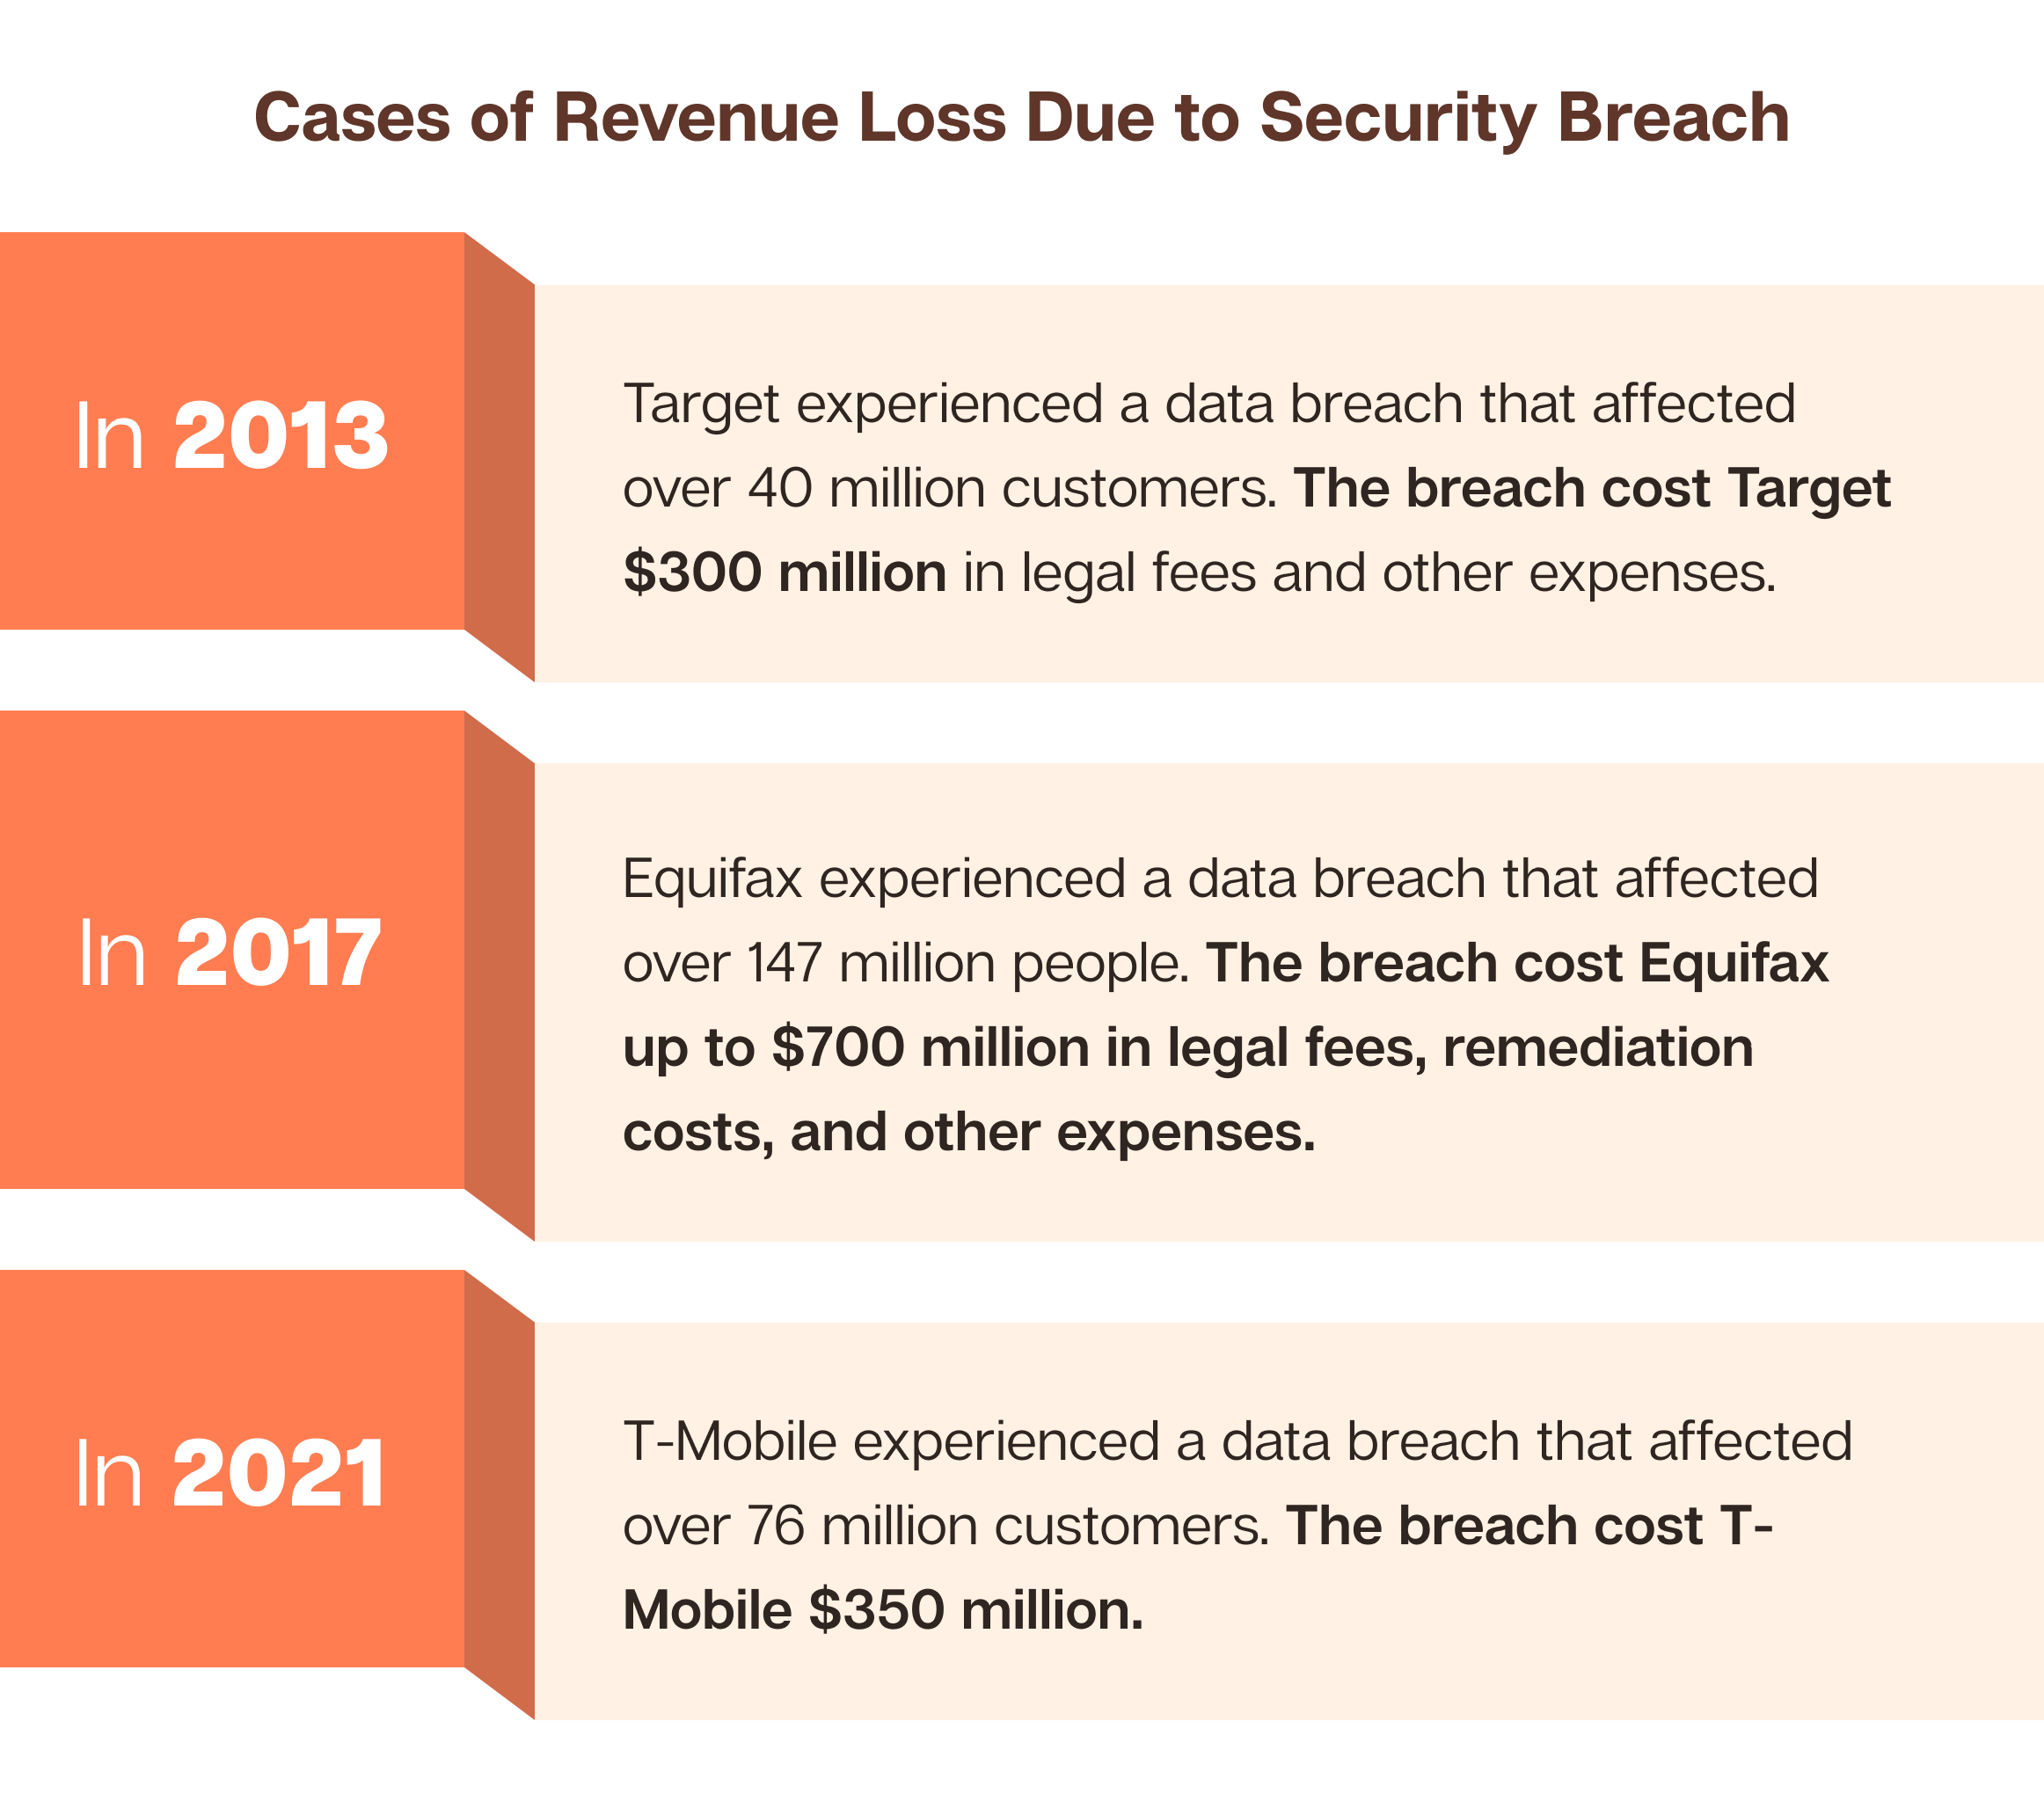 Examples of how security breach can lead to revenue loss in millions